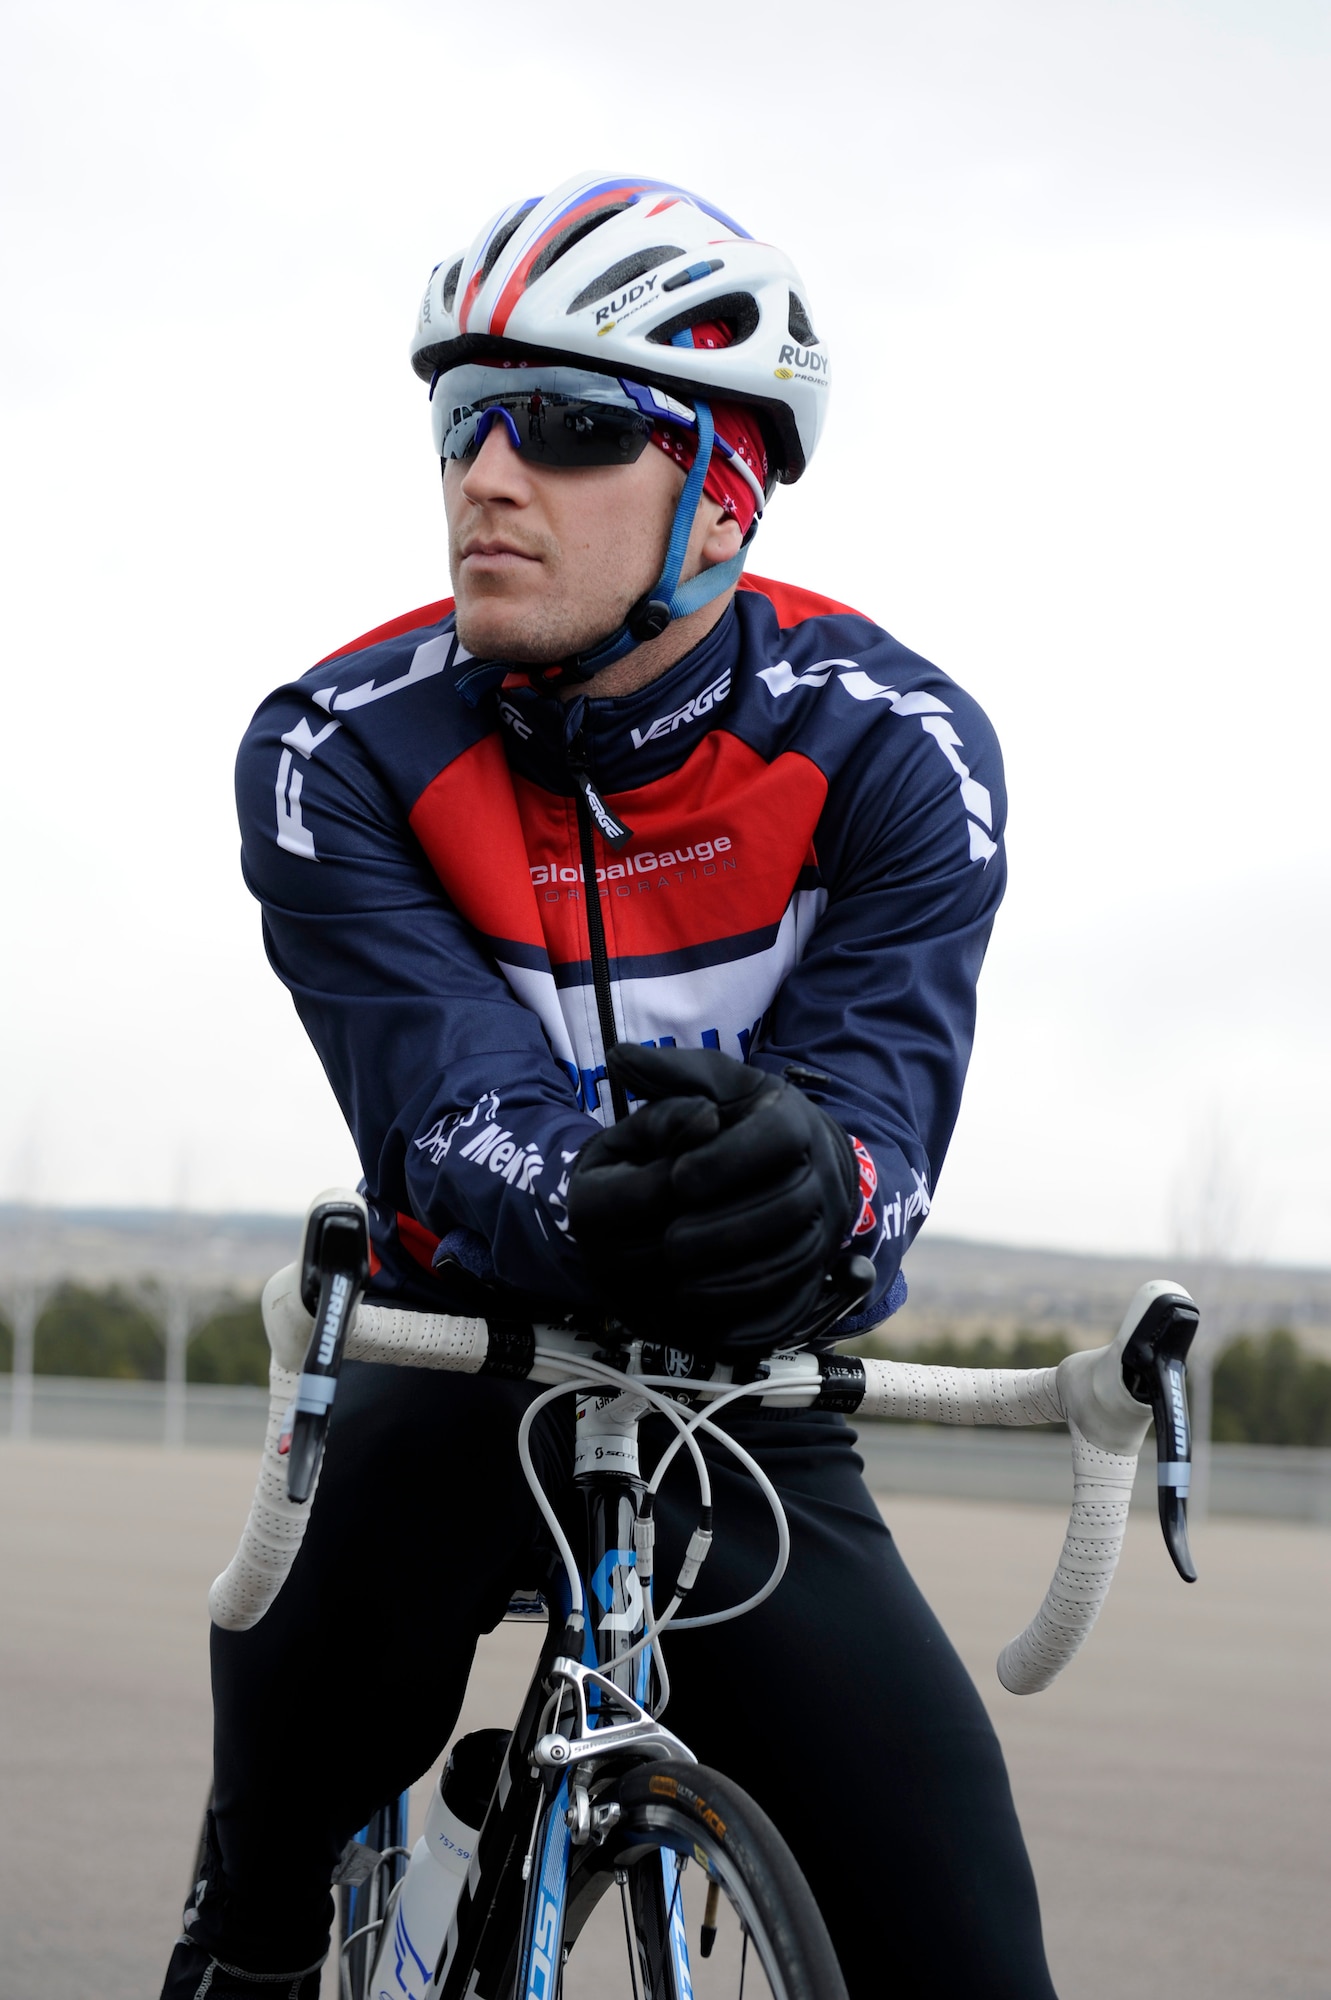 Capt. Mitchell Kieffer gears up for a bike ride at the Academy during the Wounded Warrior Games training camp held in Colorado Springs, Colo., April 15, 2013. (U.S. Air Force photo/Desiree N. Palacios)